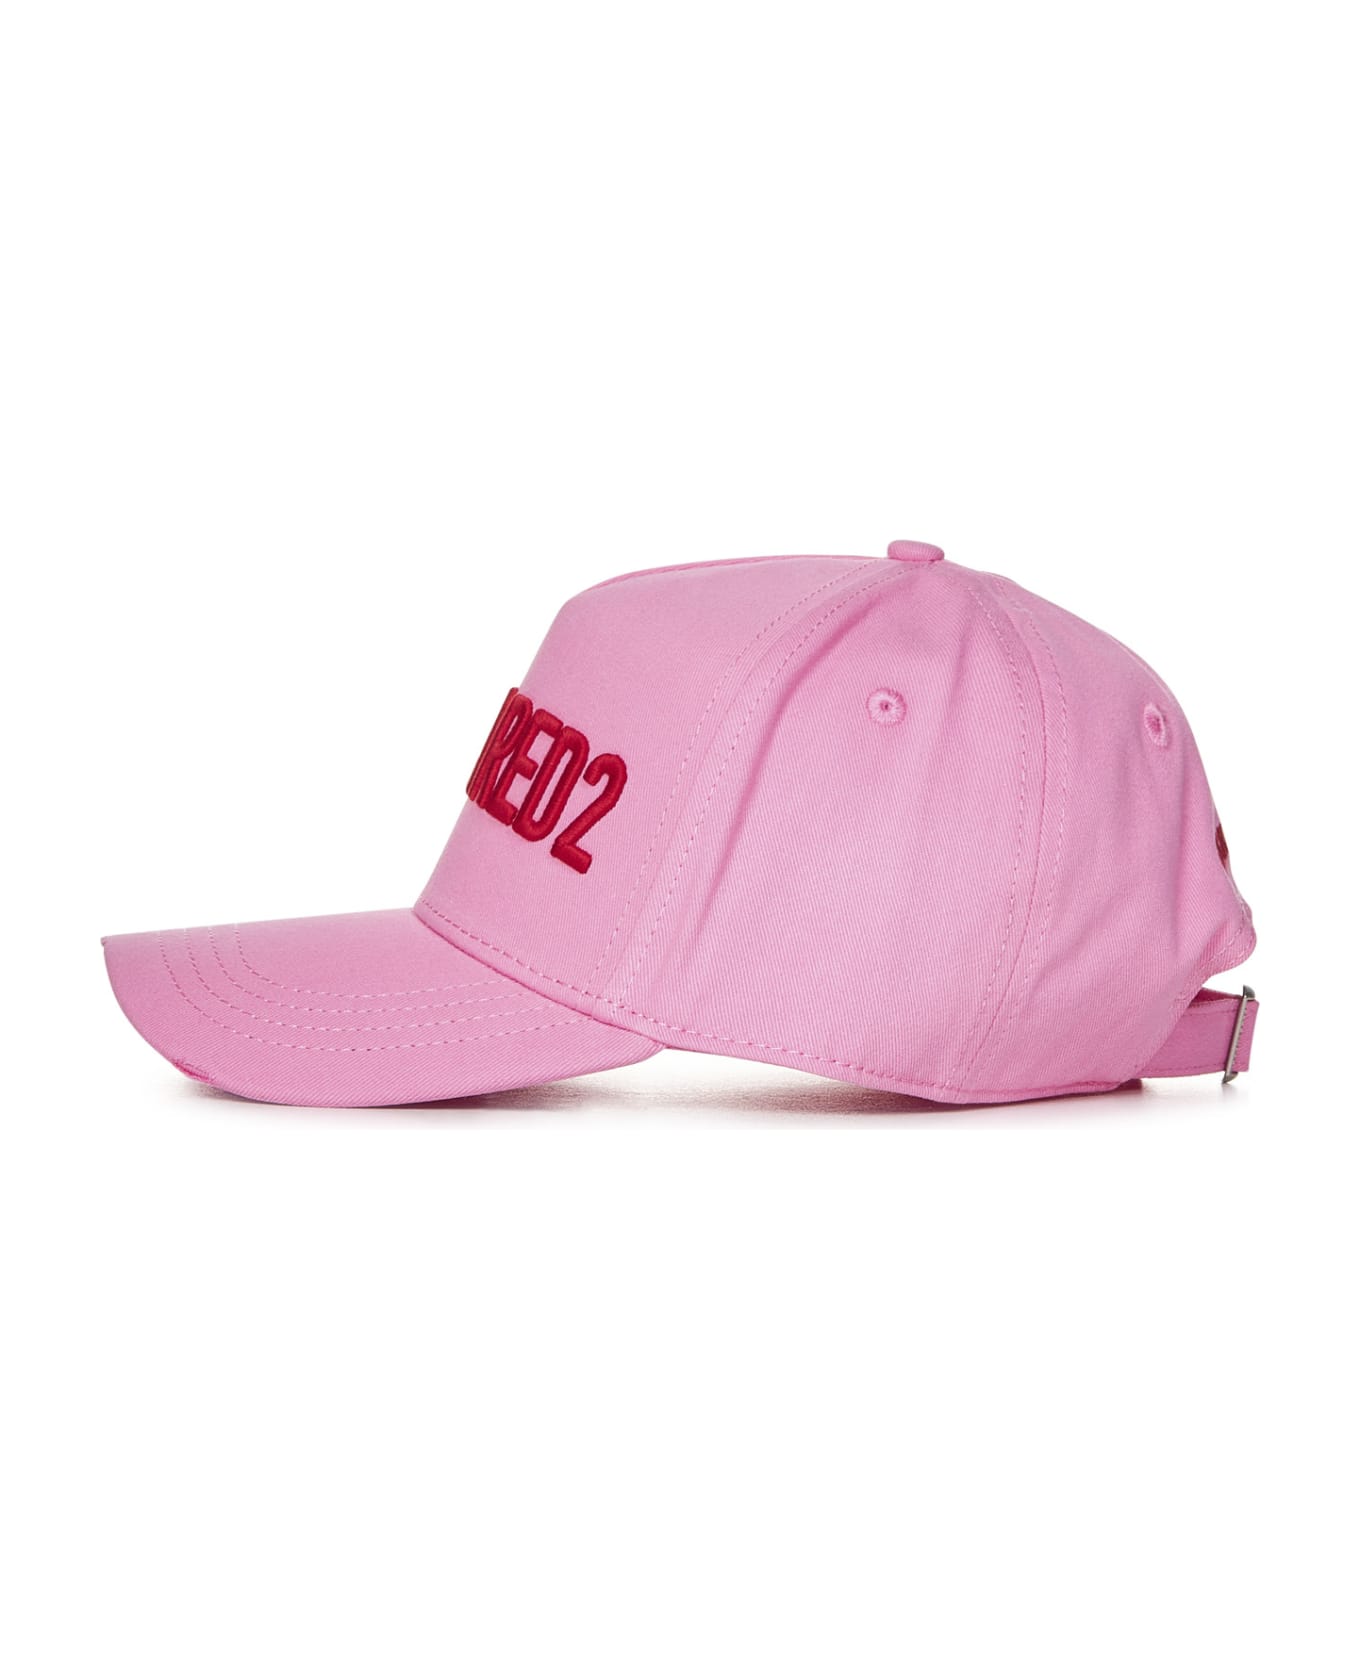 Dsquared2 Dquared2 Hat - Pink